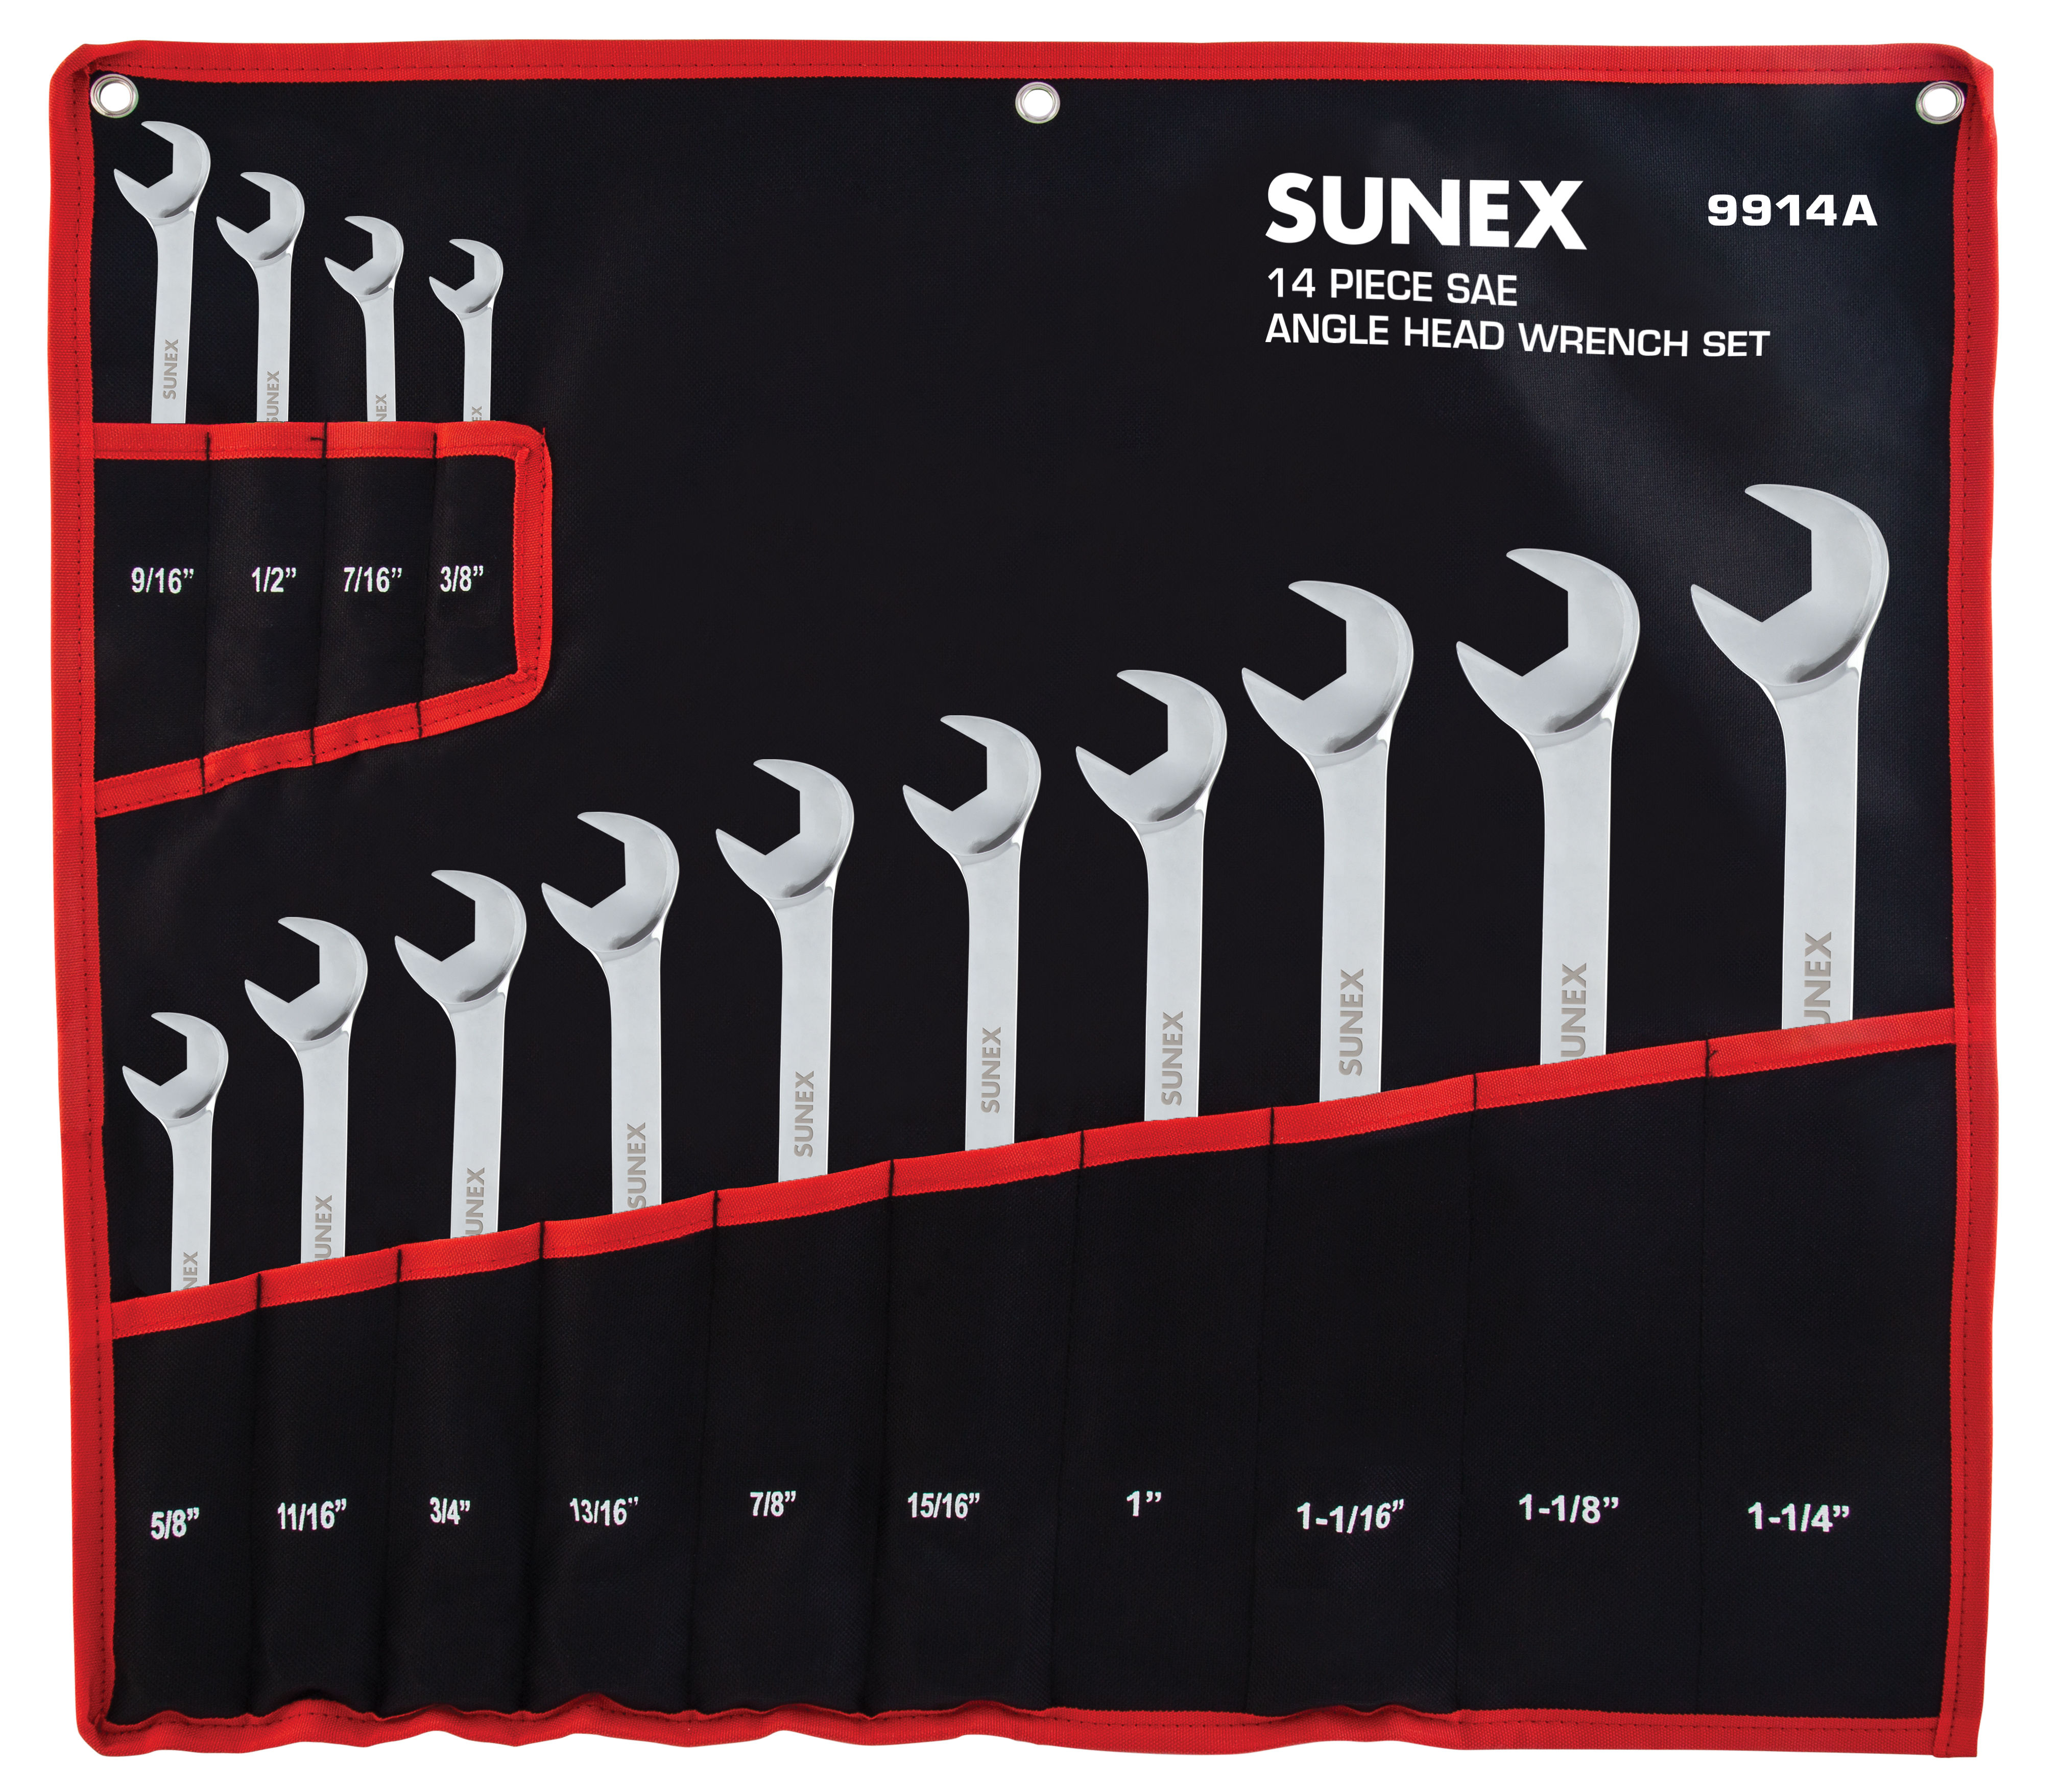 Angled Wrench Sunex 991406 Tools 11/16 In 